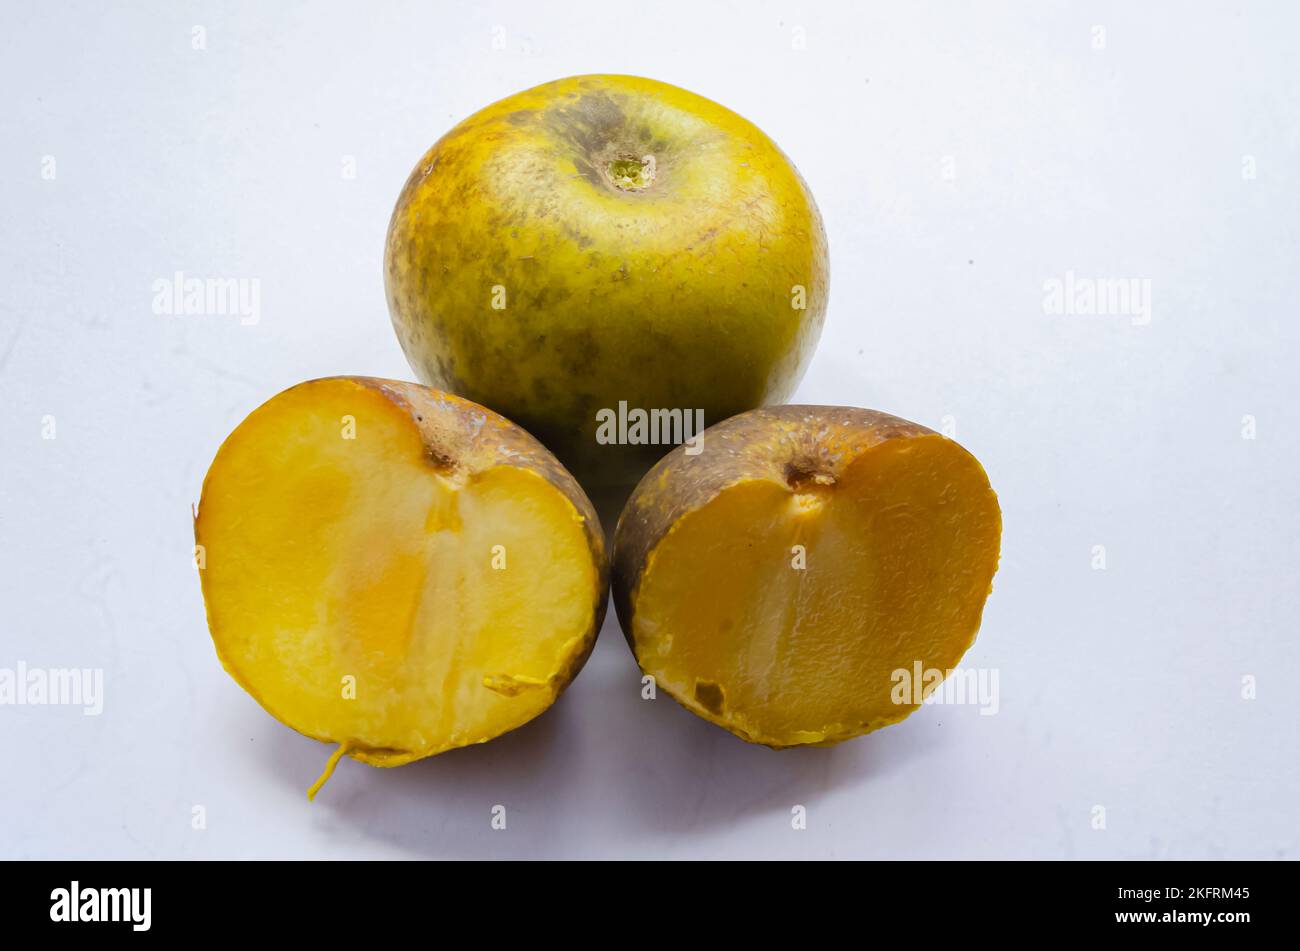 A whole and two halves ripe white sapote fruits are on a white surface. Stock Photo